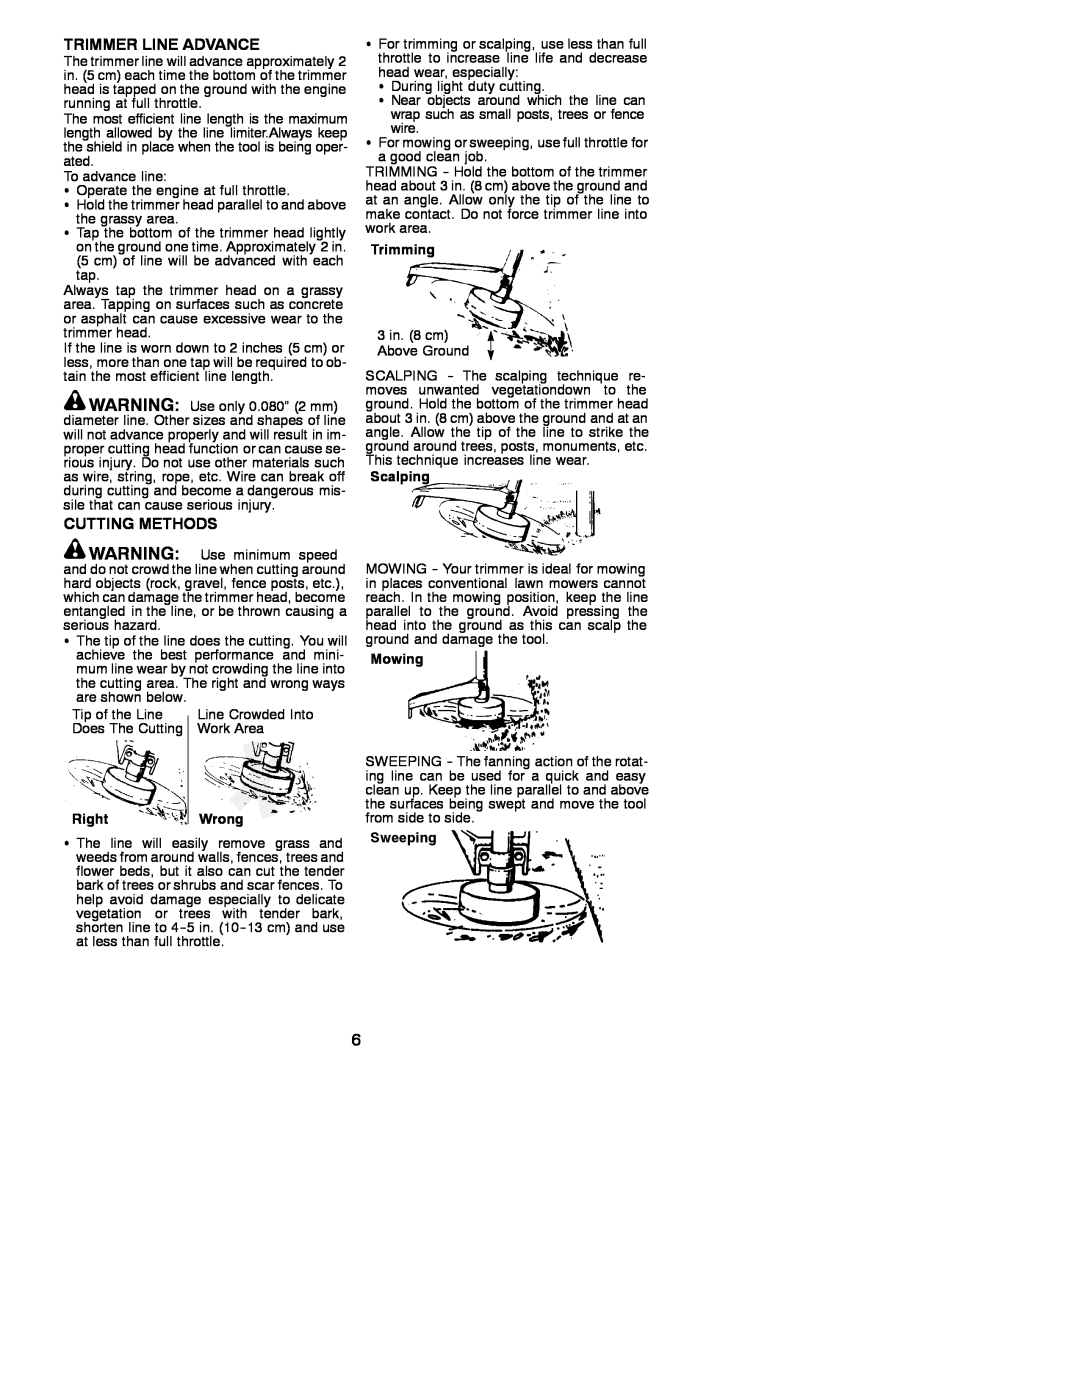 Weed Eater 530086929 instruction manual Trimmer Line Advance, Cutting Methods, Right, Trimming, Scalping, Mowing, Sweeping 